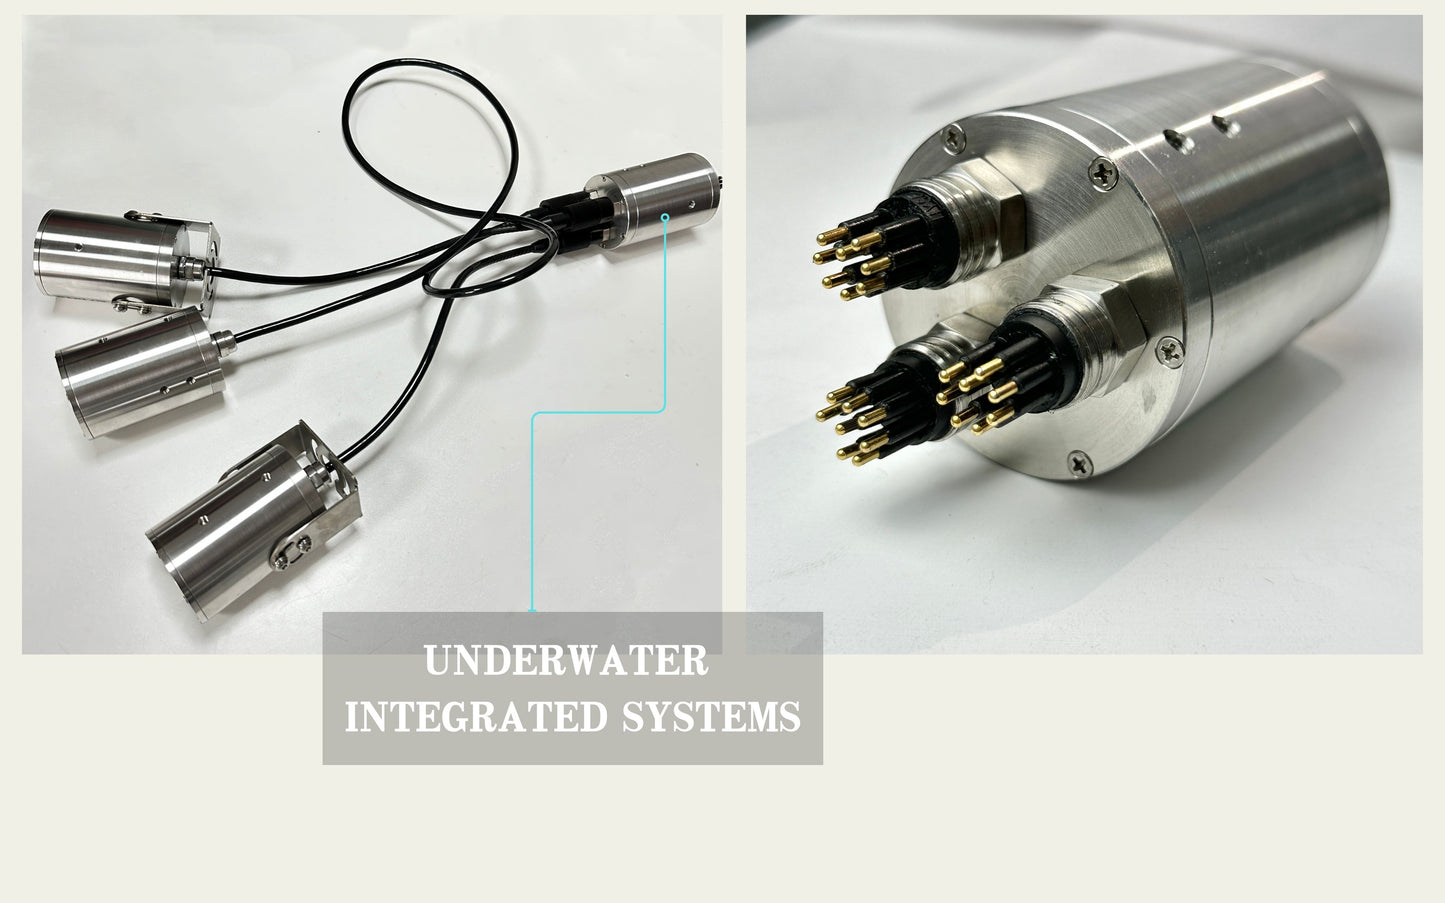 Underwater hub supports three camera access for flexible cabling